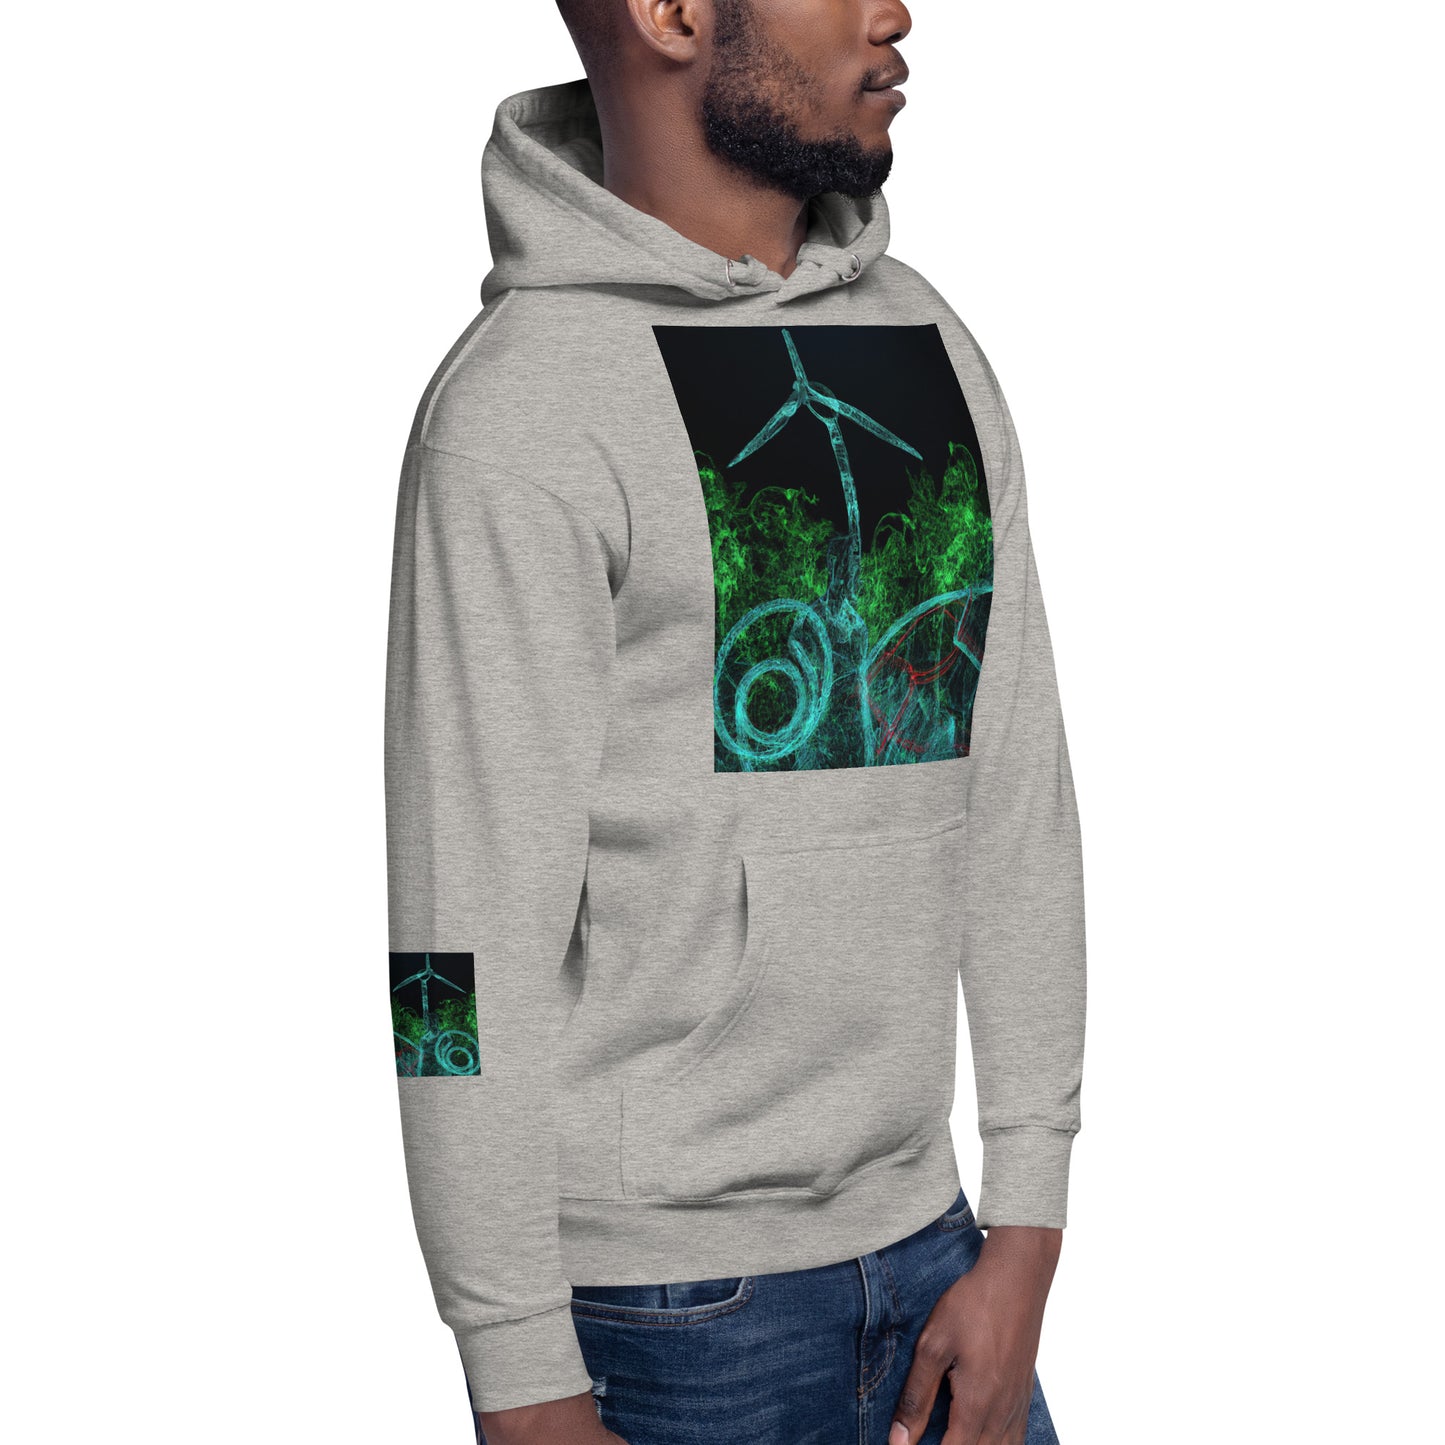 Stay Warm and Stylish with Our Abstract Green Unisex Hoodie - Shop Now!